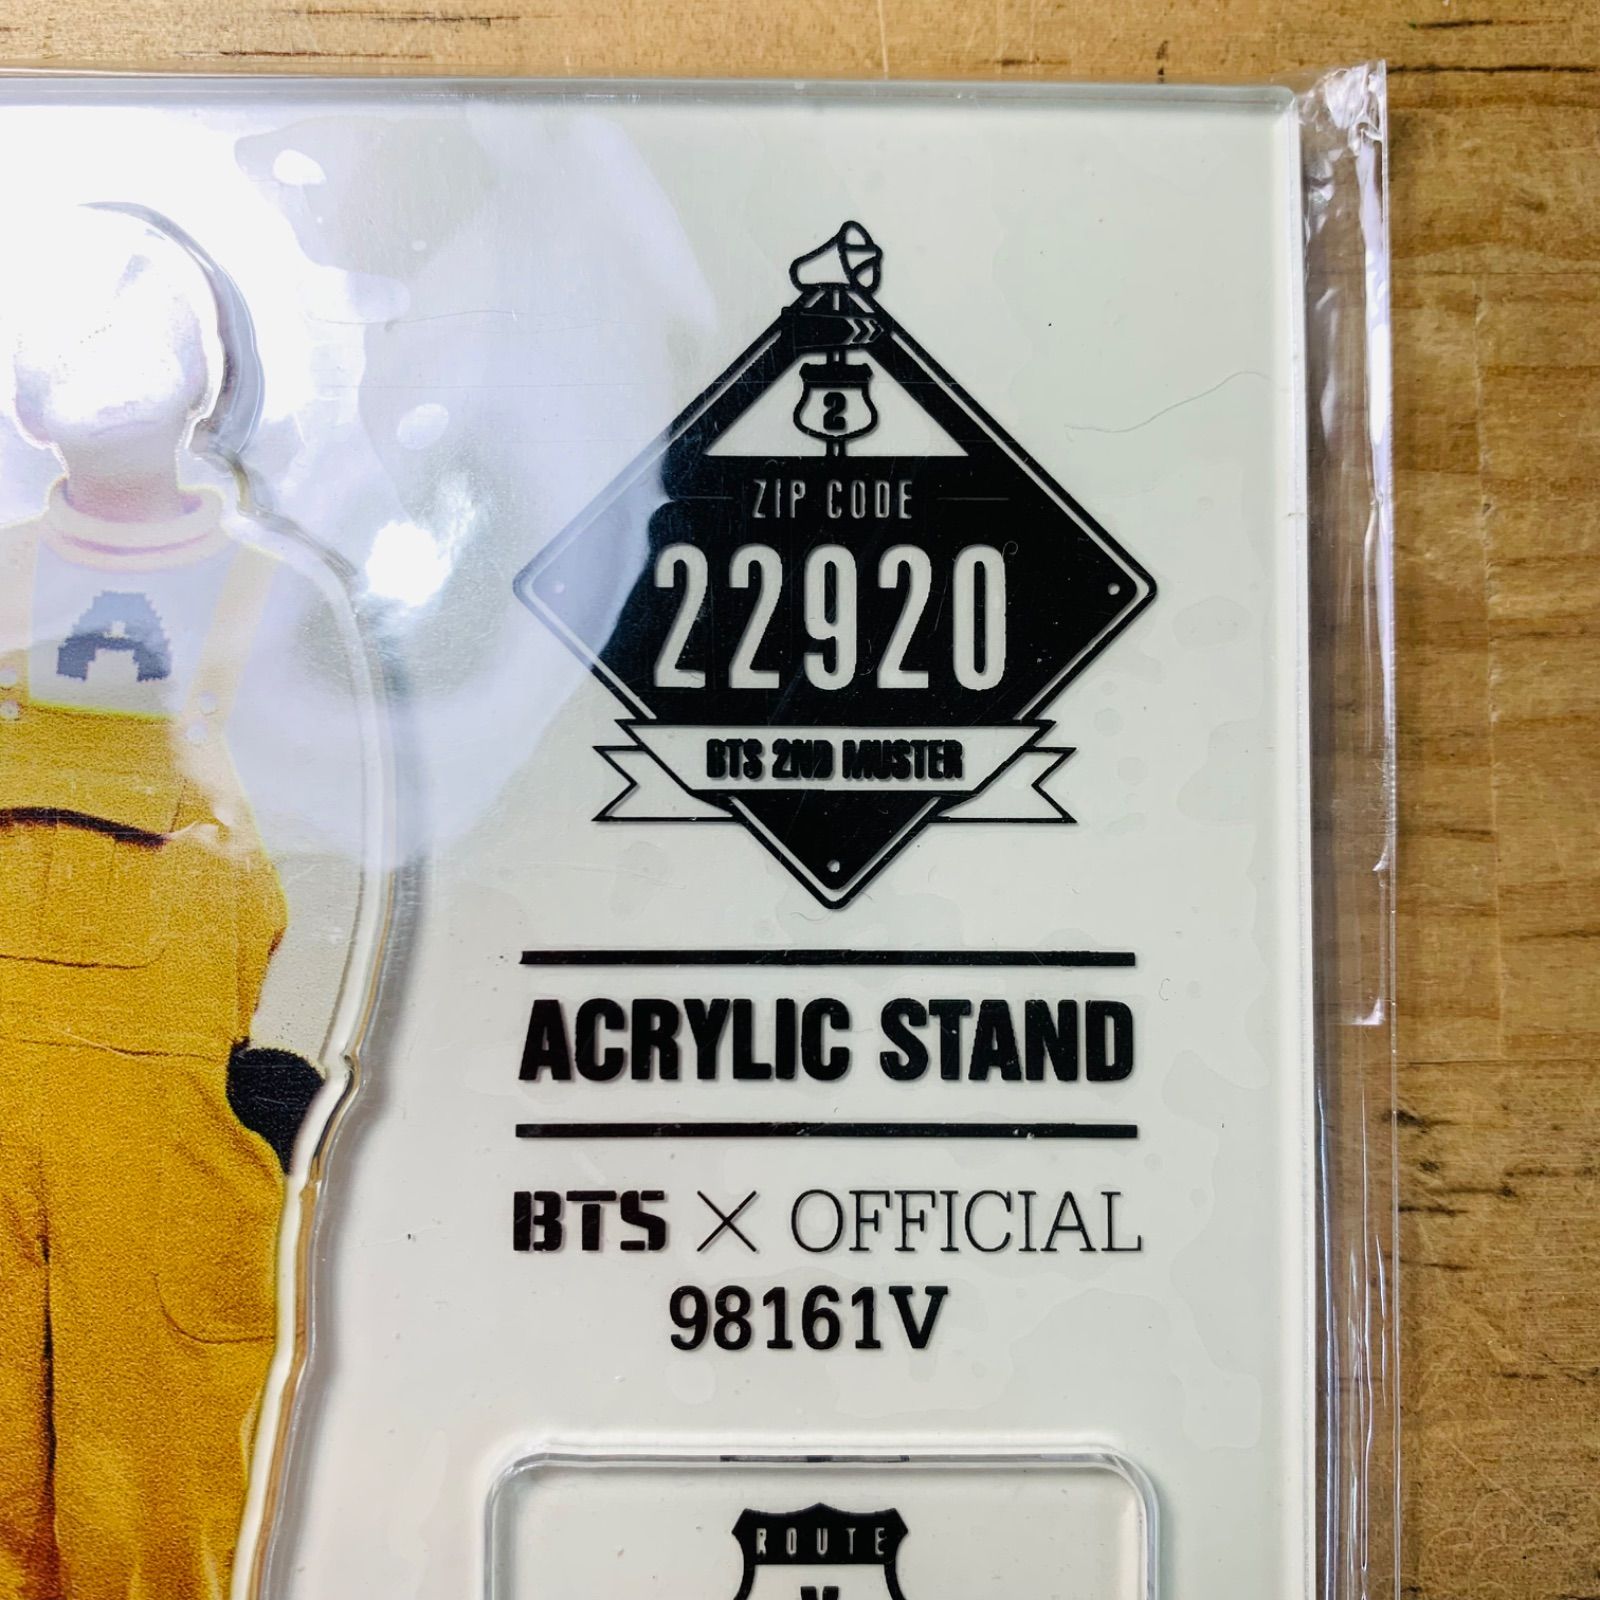 ☆T34653-20 BTS V テヒョン BTS 2ND MUSTER ZIP CODE：22920 アクリル 